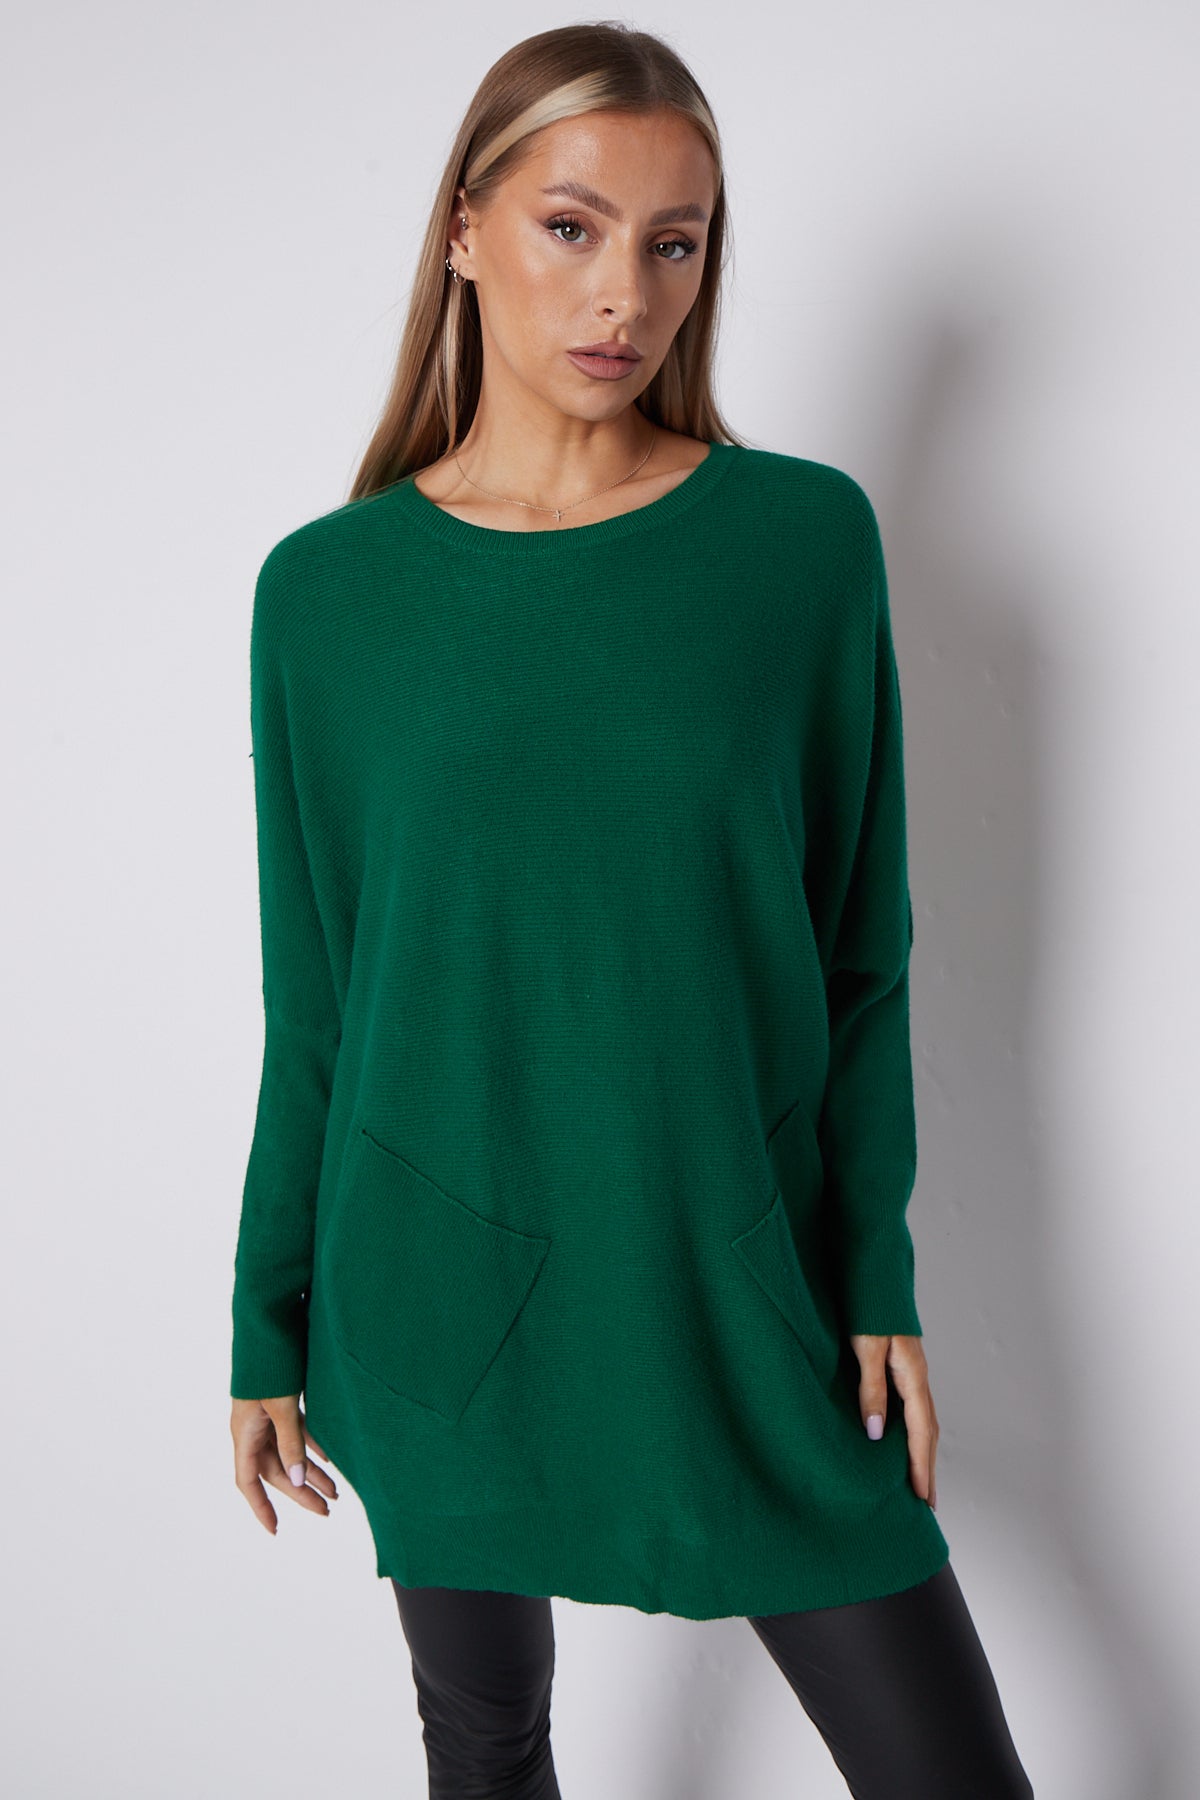 Green Batwing Sleeve Jumper with Pockets